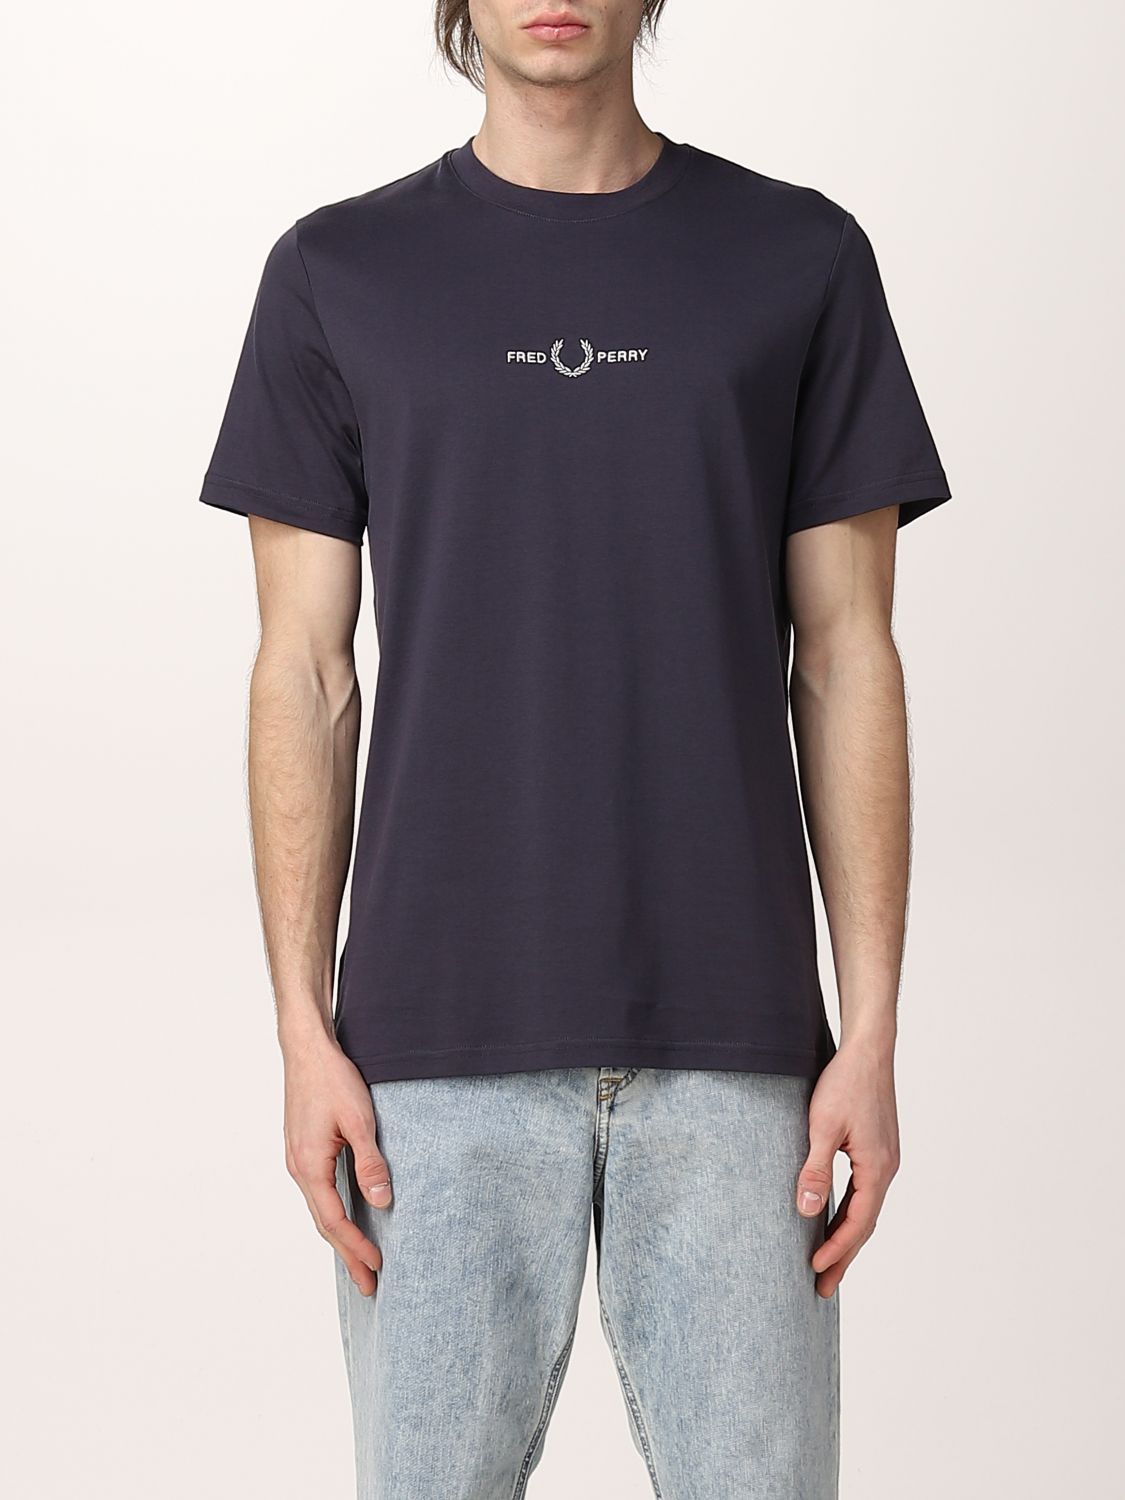 Tシャツ Fred Perry: Tシャツ メンズ Fred Perry グラファイト 1